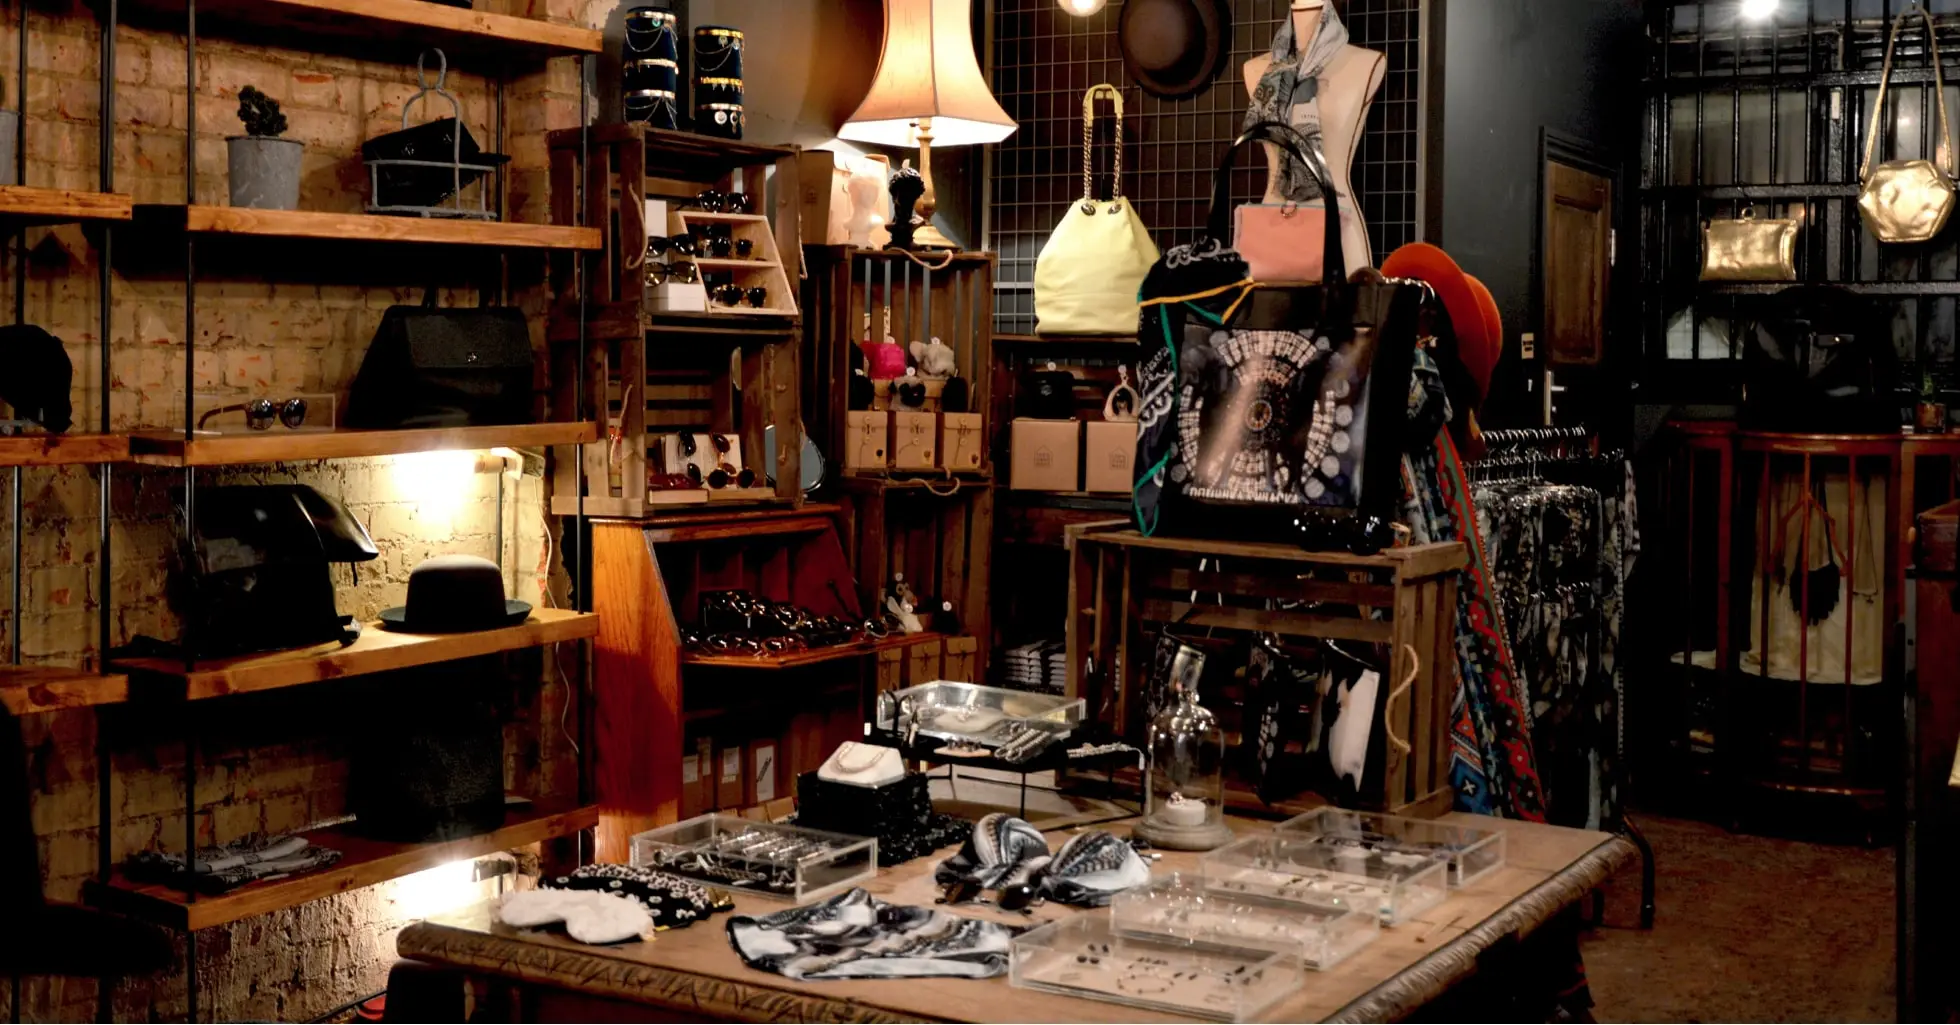 Retail store interior showcasing a variety of products, exemplifying effective Net Revenue Management strategies in practice.